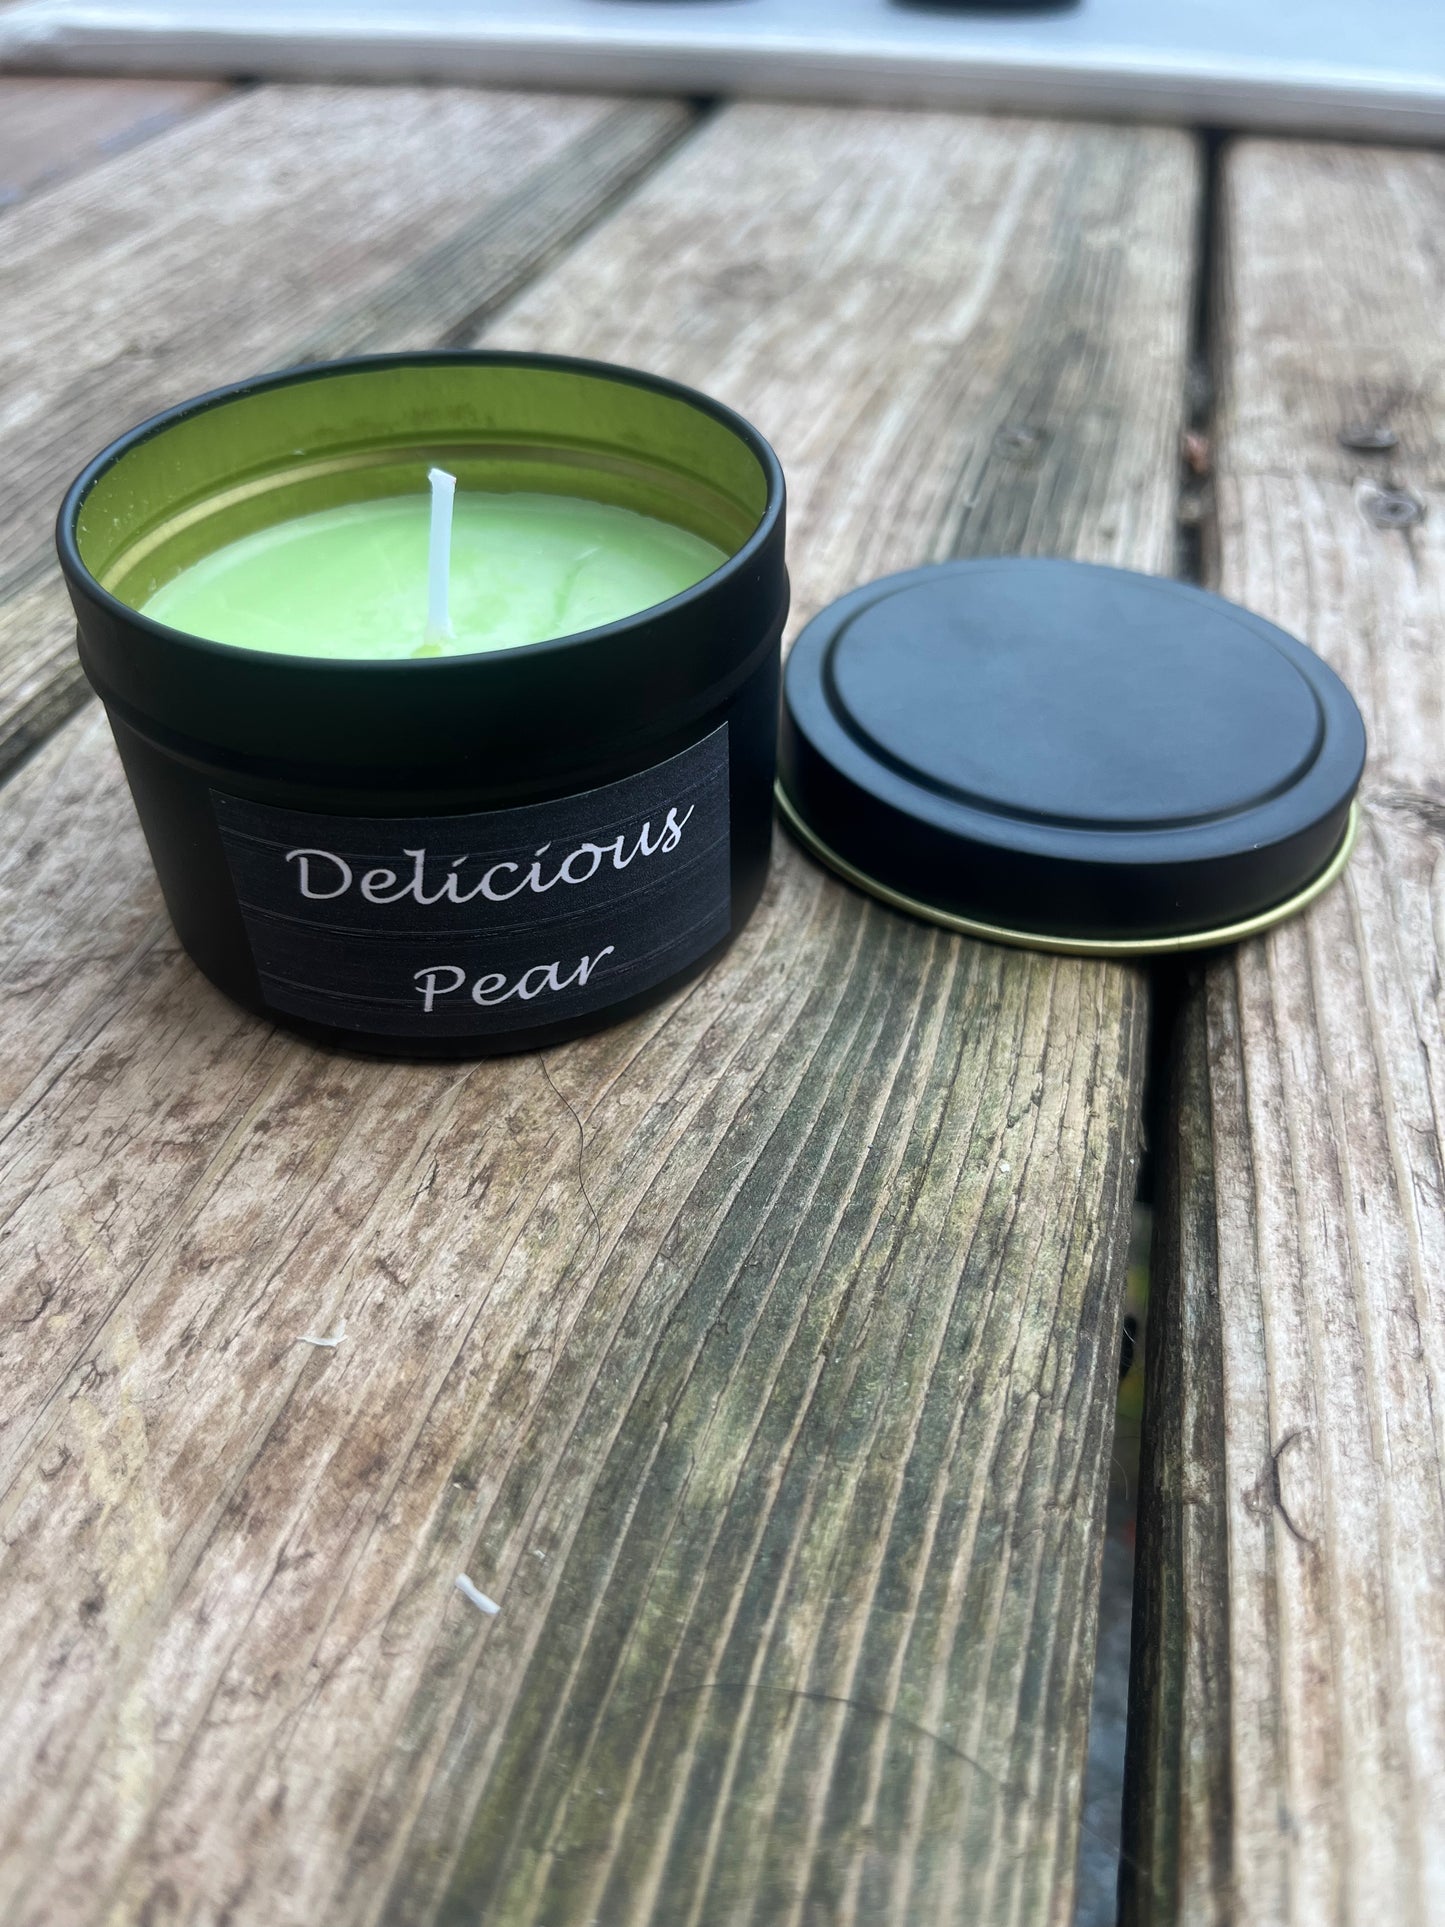 Delicious pear 4 ounce candle